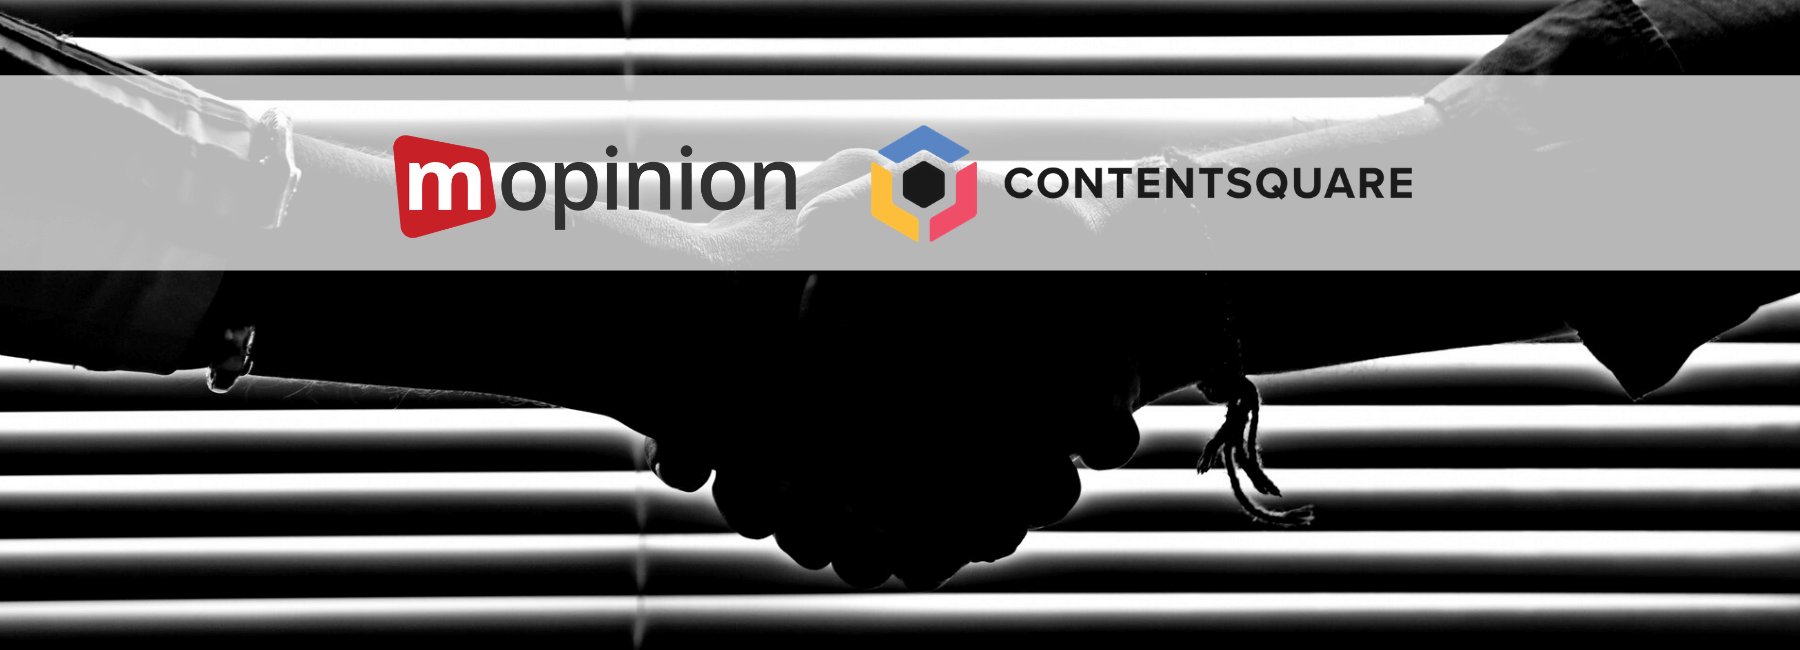 Mopinion partners up with Contentsquare